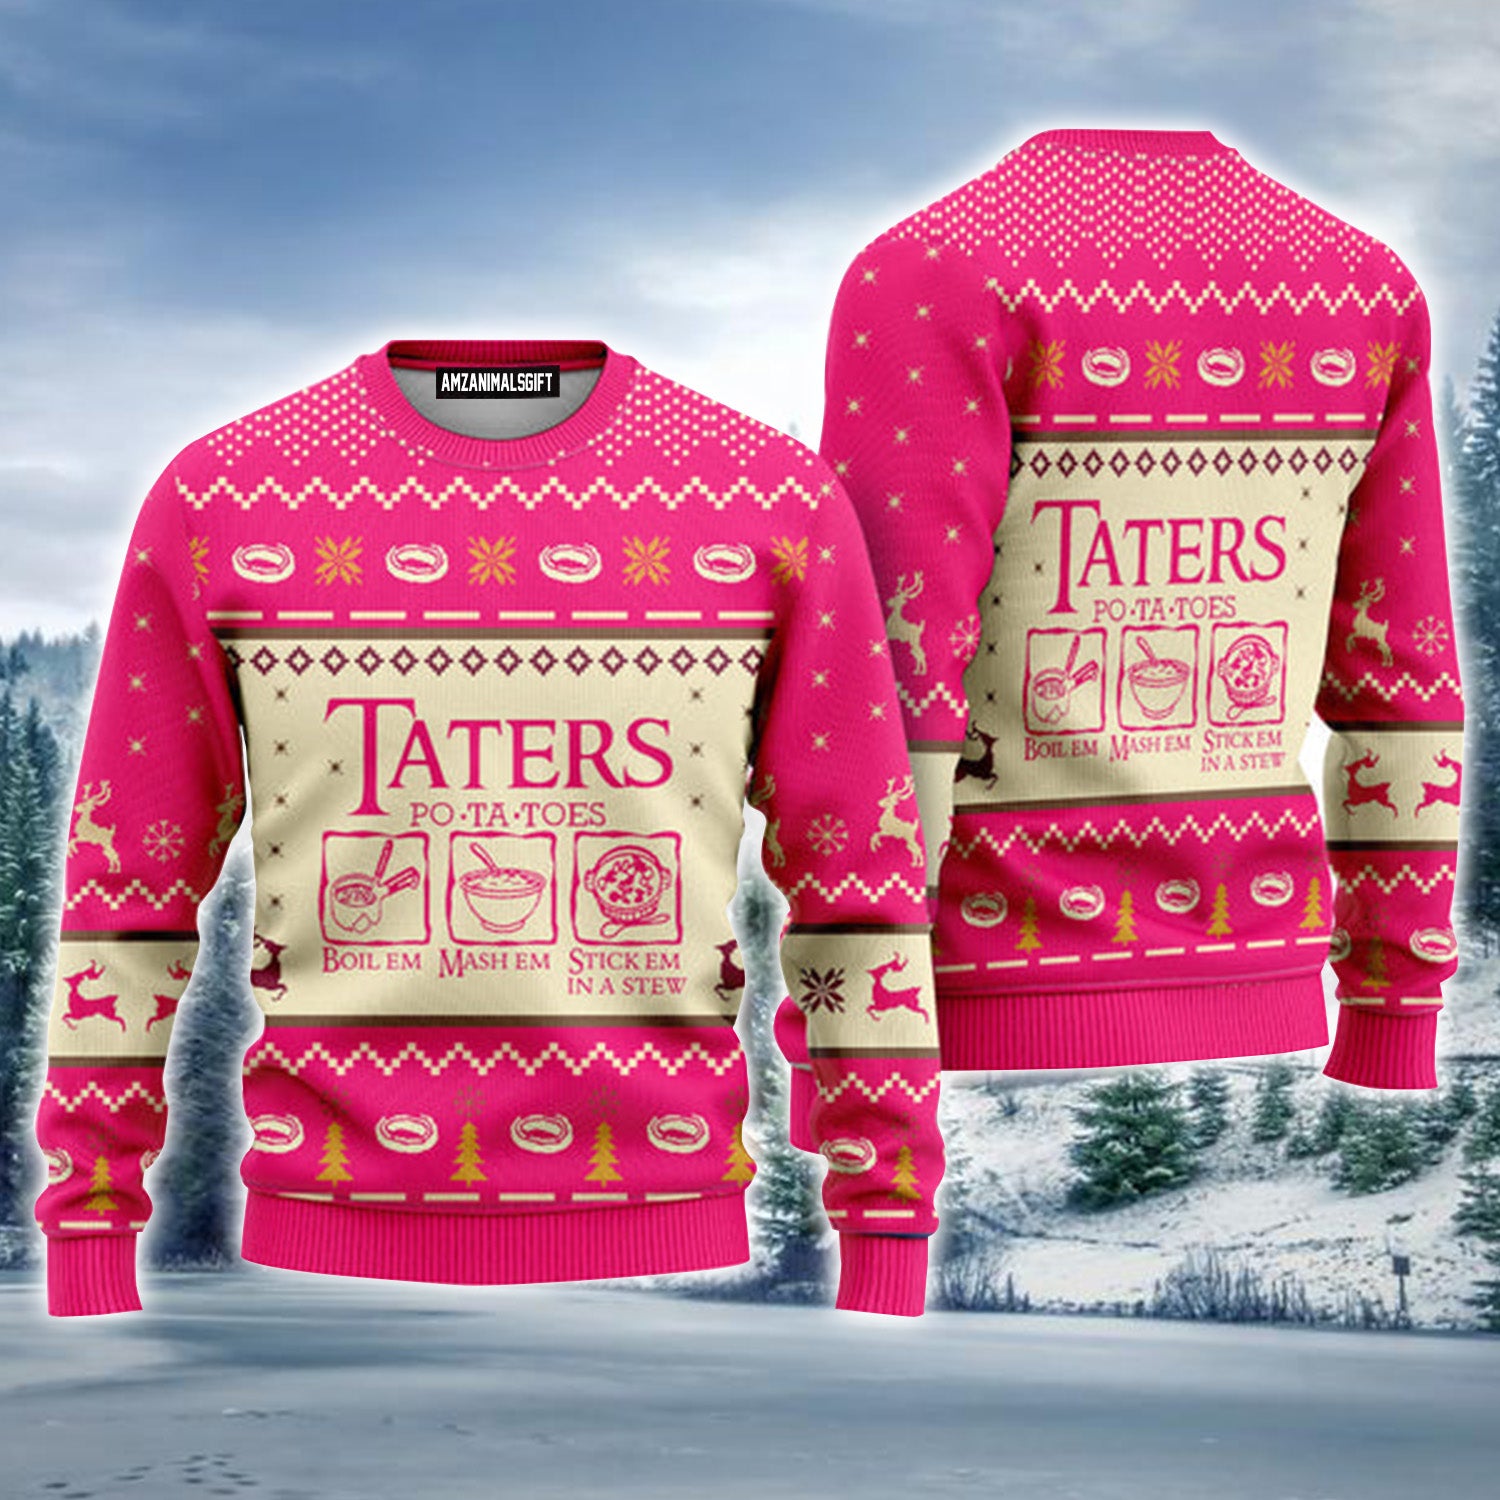 LOTR Potatoes Taters Pink Urly Christmas Sweater, Christmas Sweater For Men & Women - Perfect Gift For Christmas, Family, Friends